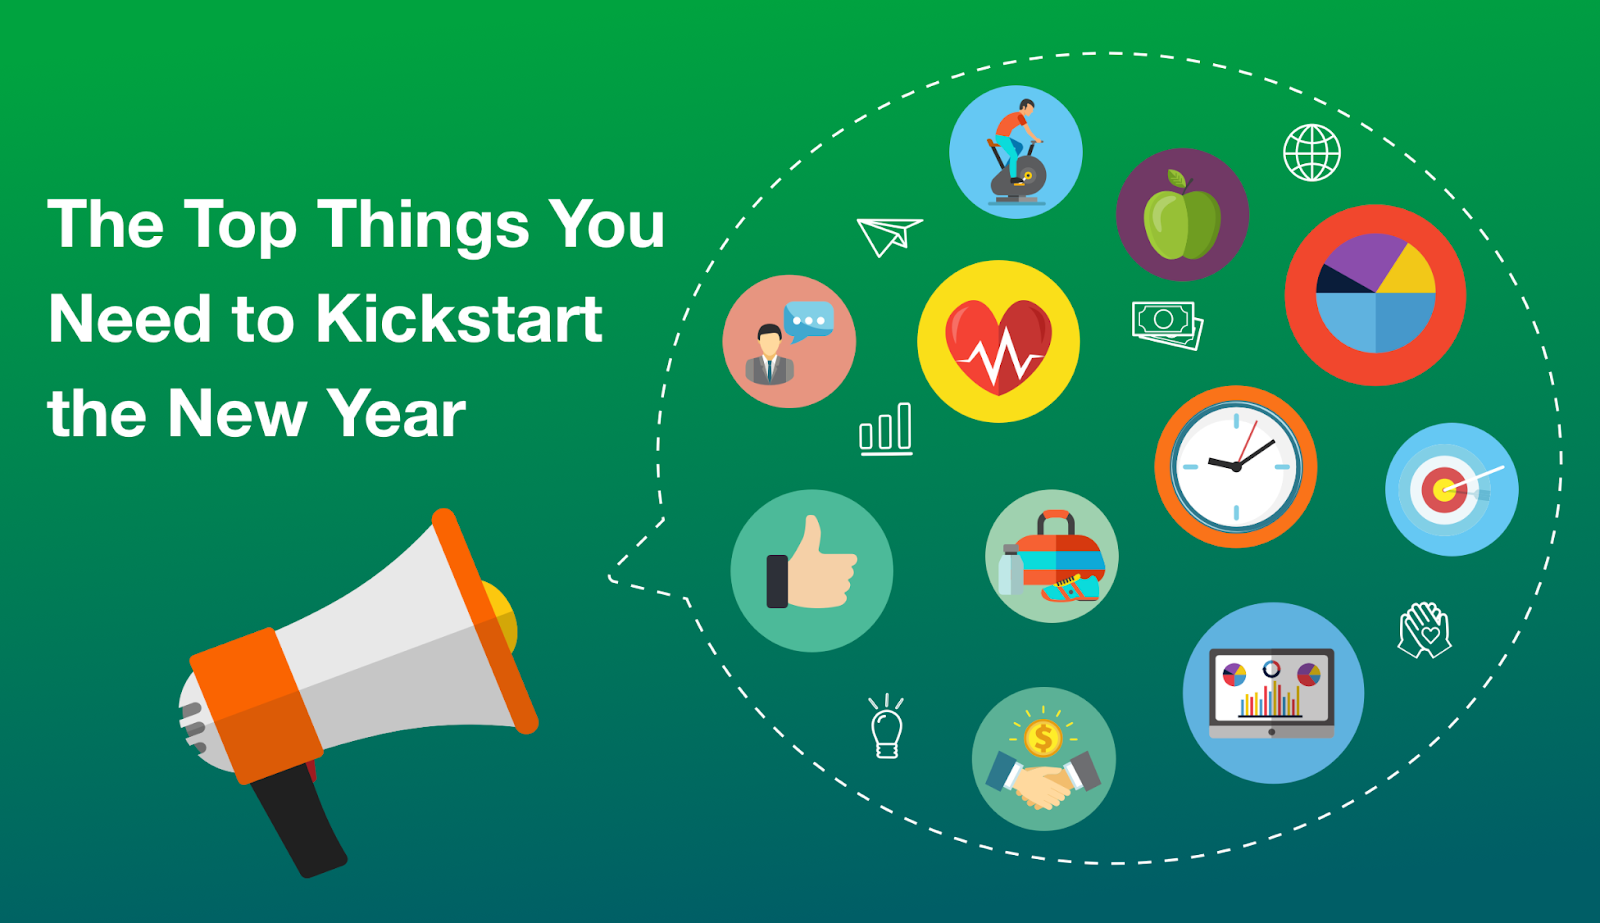 Illustration of a megaphone pointing towards a speech bubble containing various icons representing different personal and professional goals. Title reads: The Top Things You Need to Kickstart the New Year.